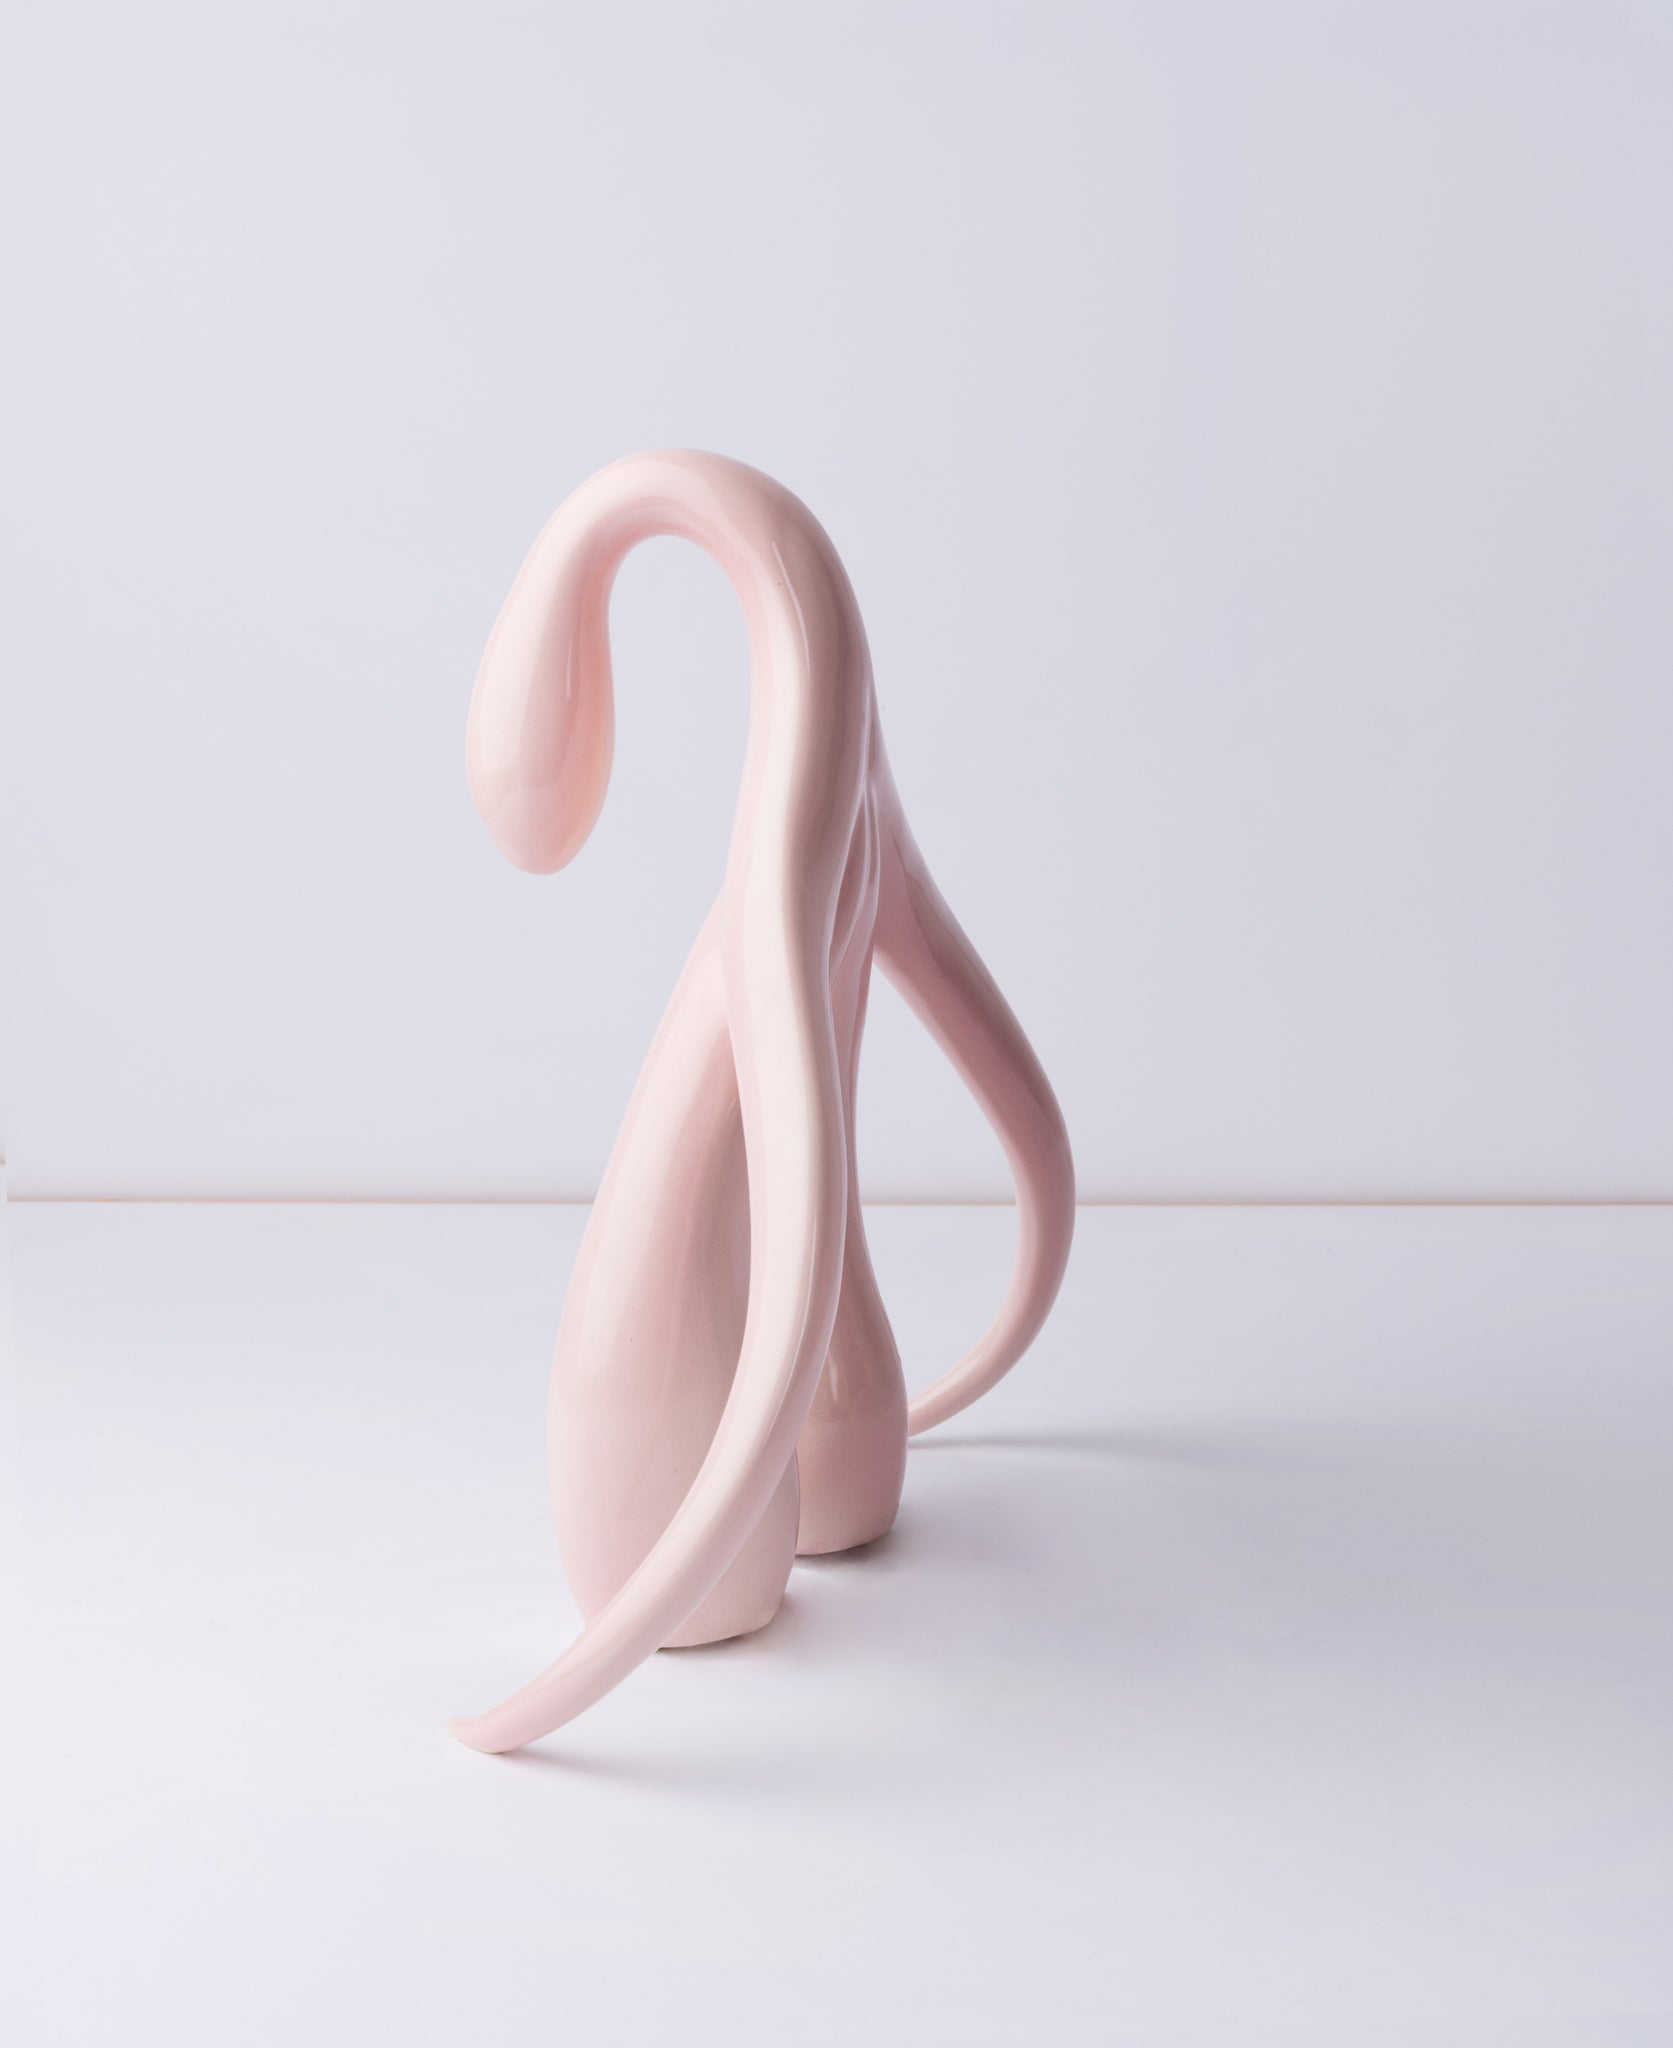 Side view of "Swan Series" ceramic sculpture in light pink by Sophia Wallace, 2022.